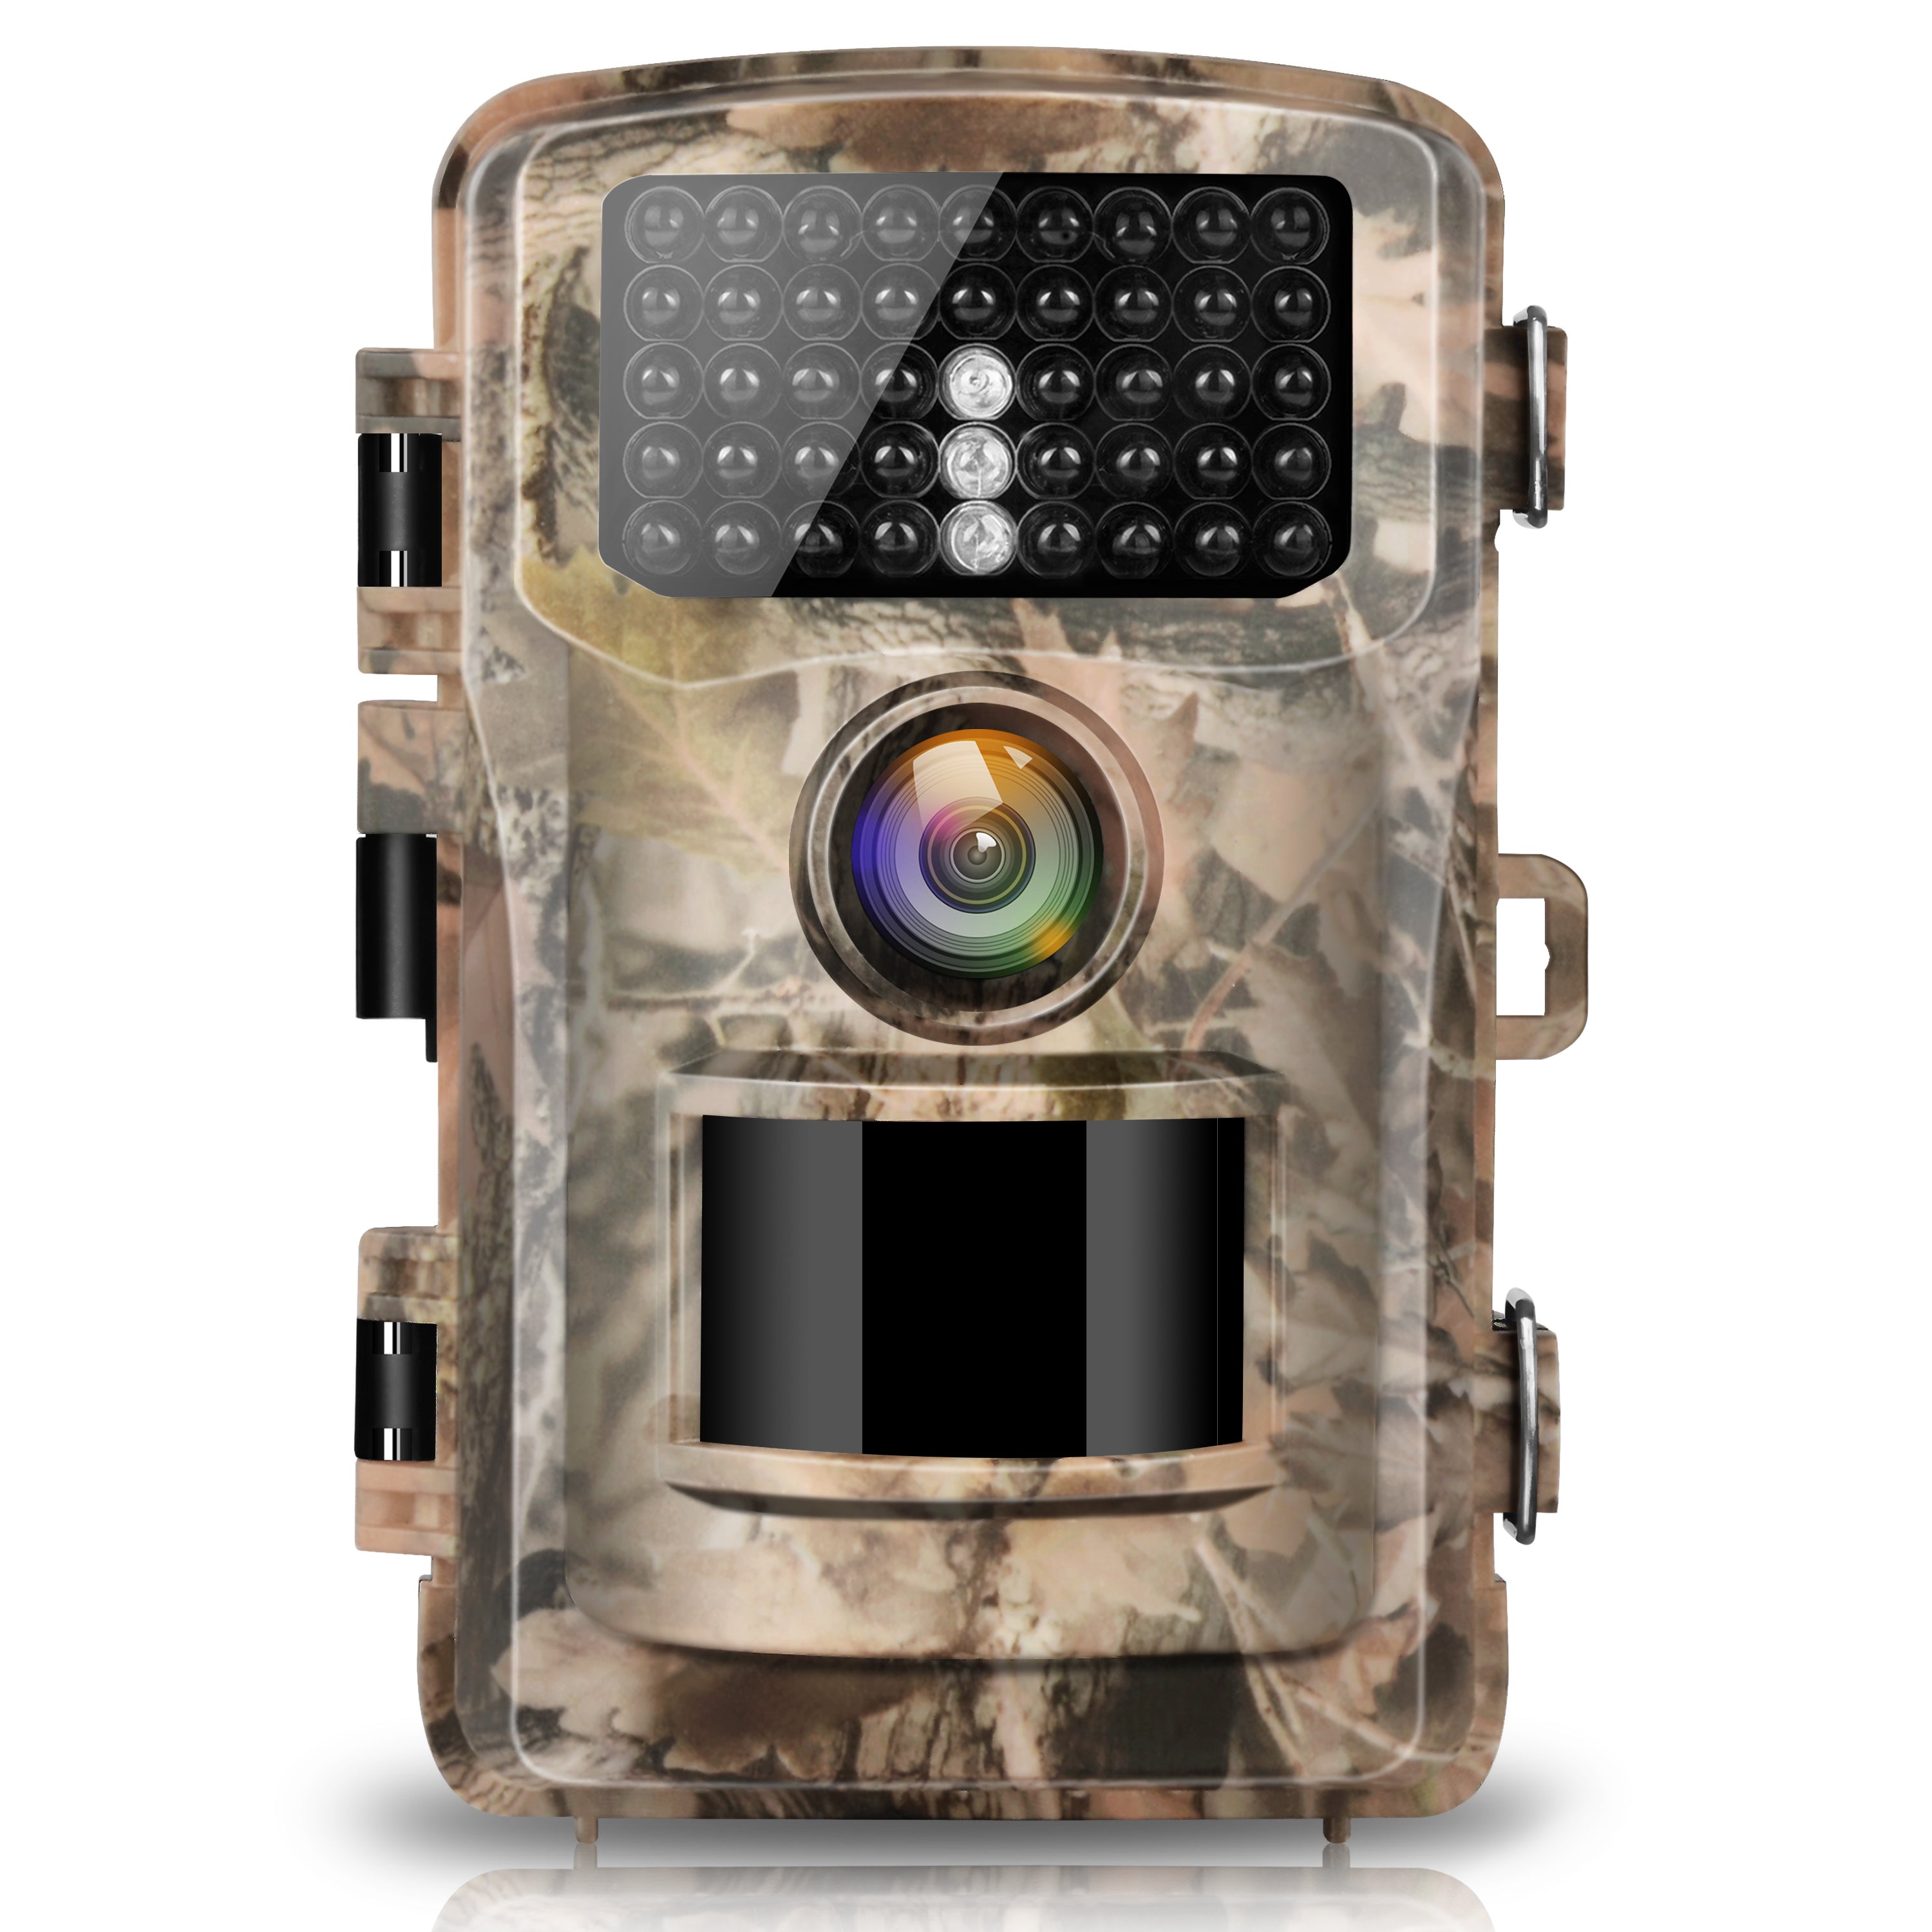 Voopeak T40A FHD 4K & 42MP Trail Game Camera (Only available in the AU)Voopeak T40A FHD 4K & 42MP Trail Game Camera (Only available in the AU)